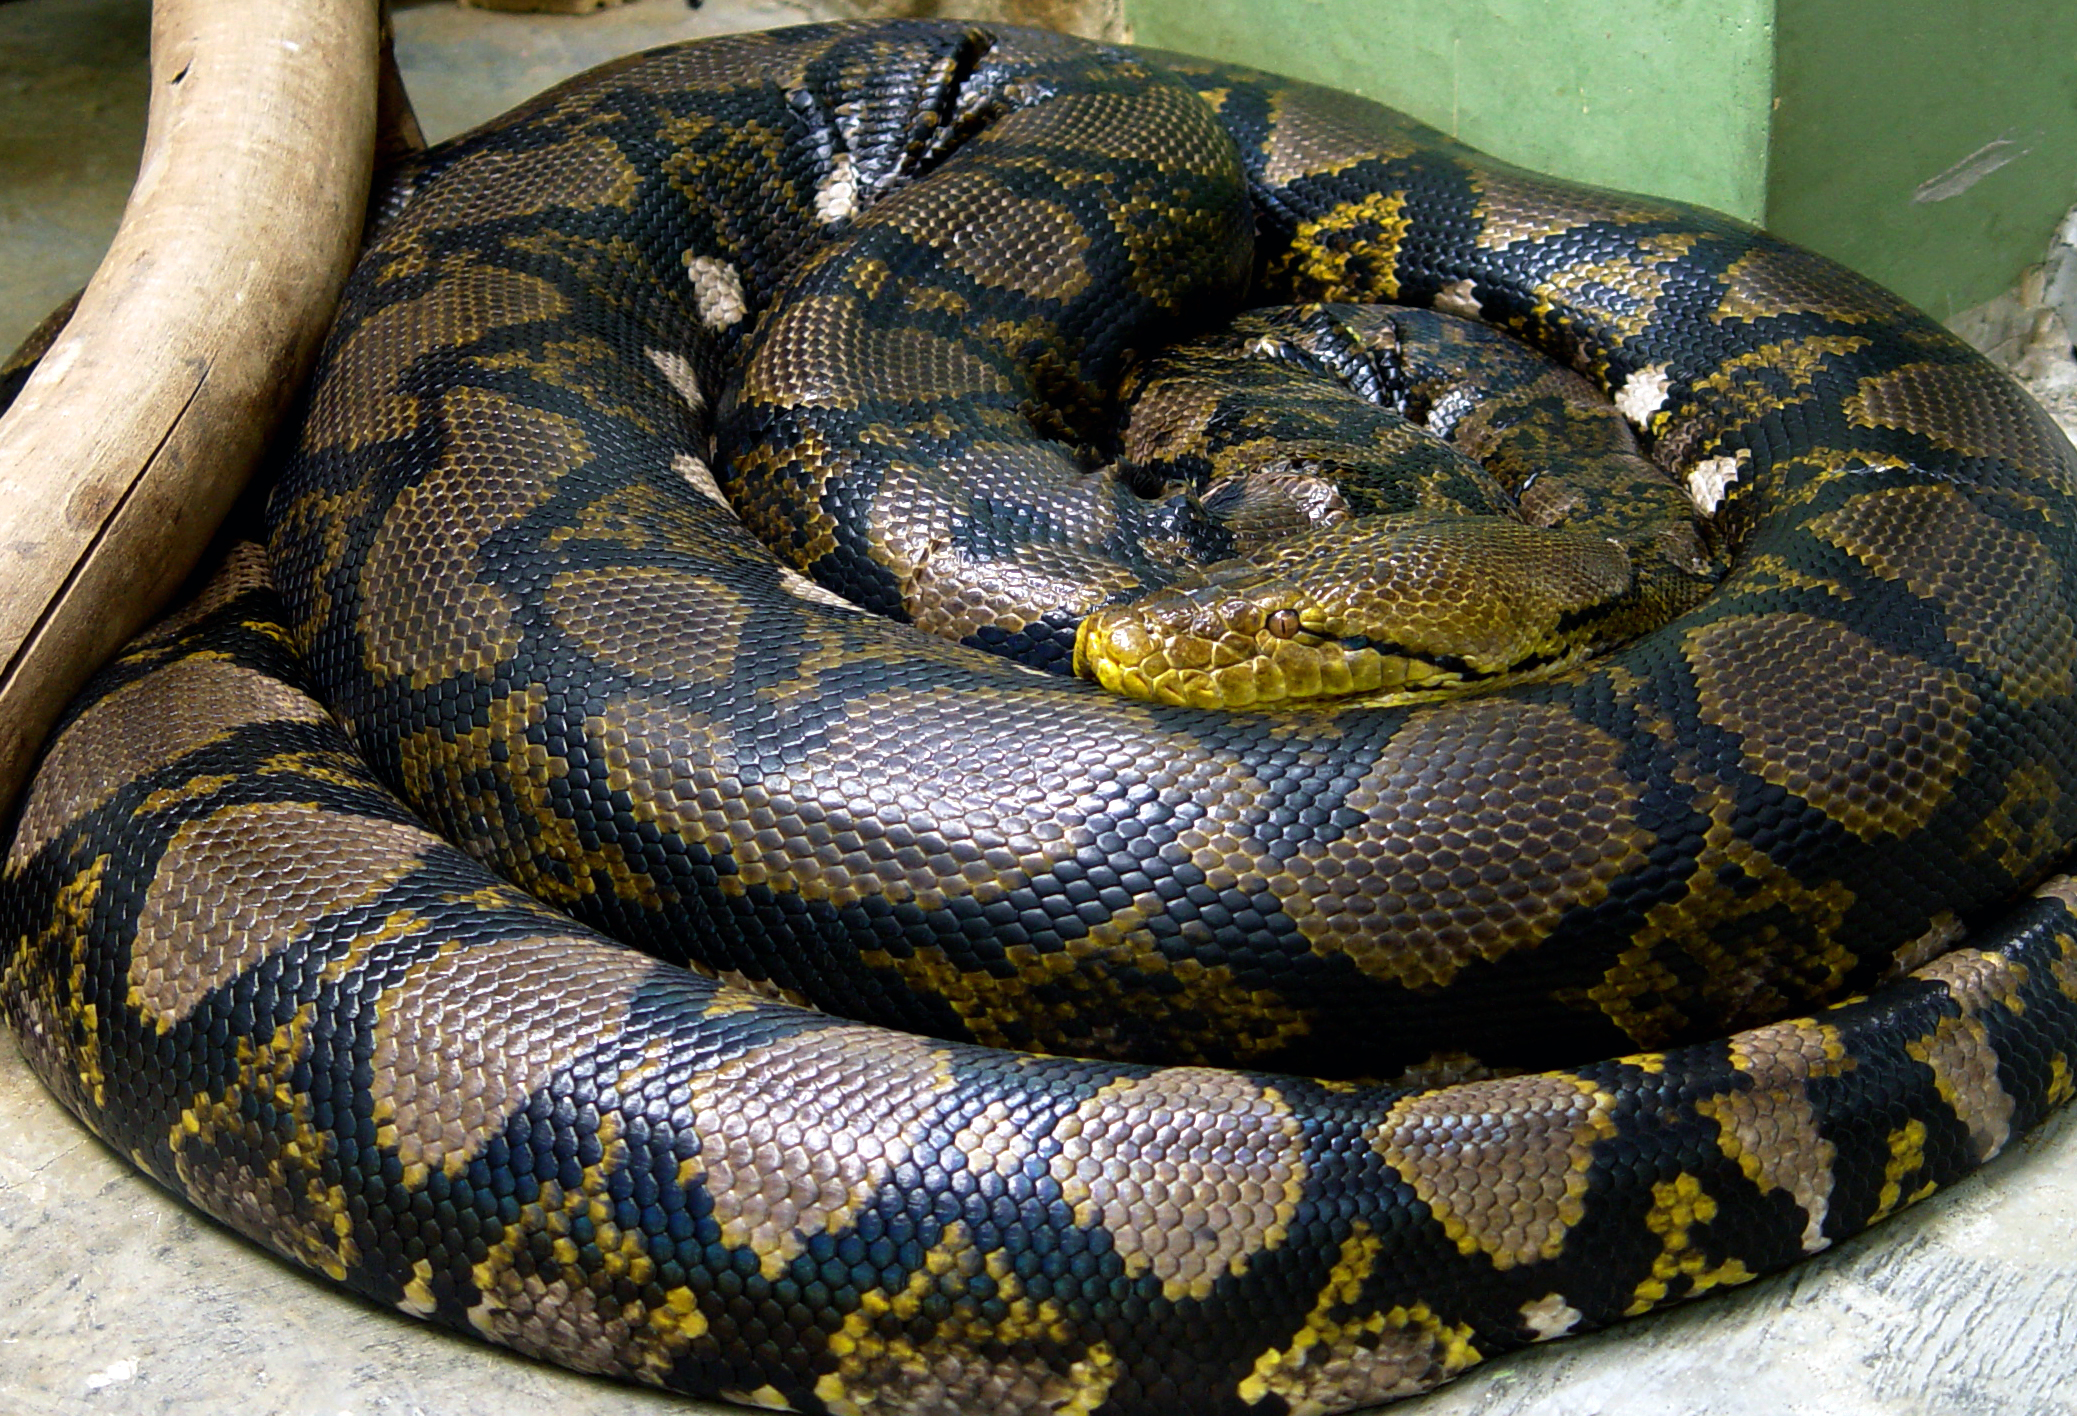 Are pythons and snakes the same thing?